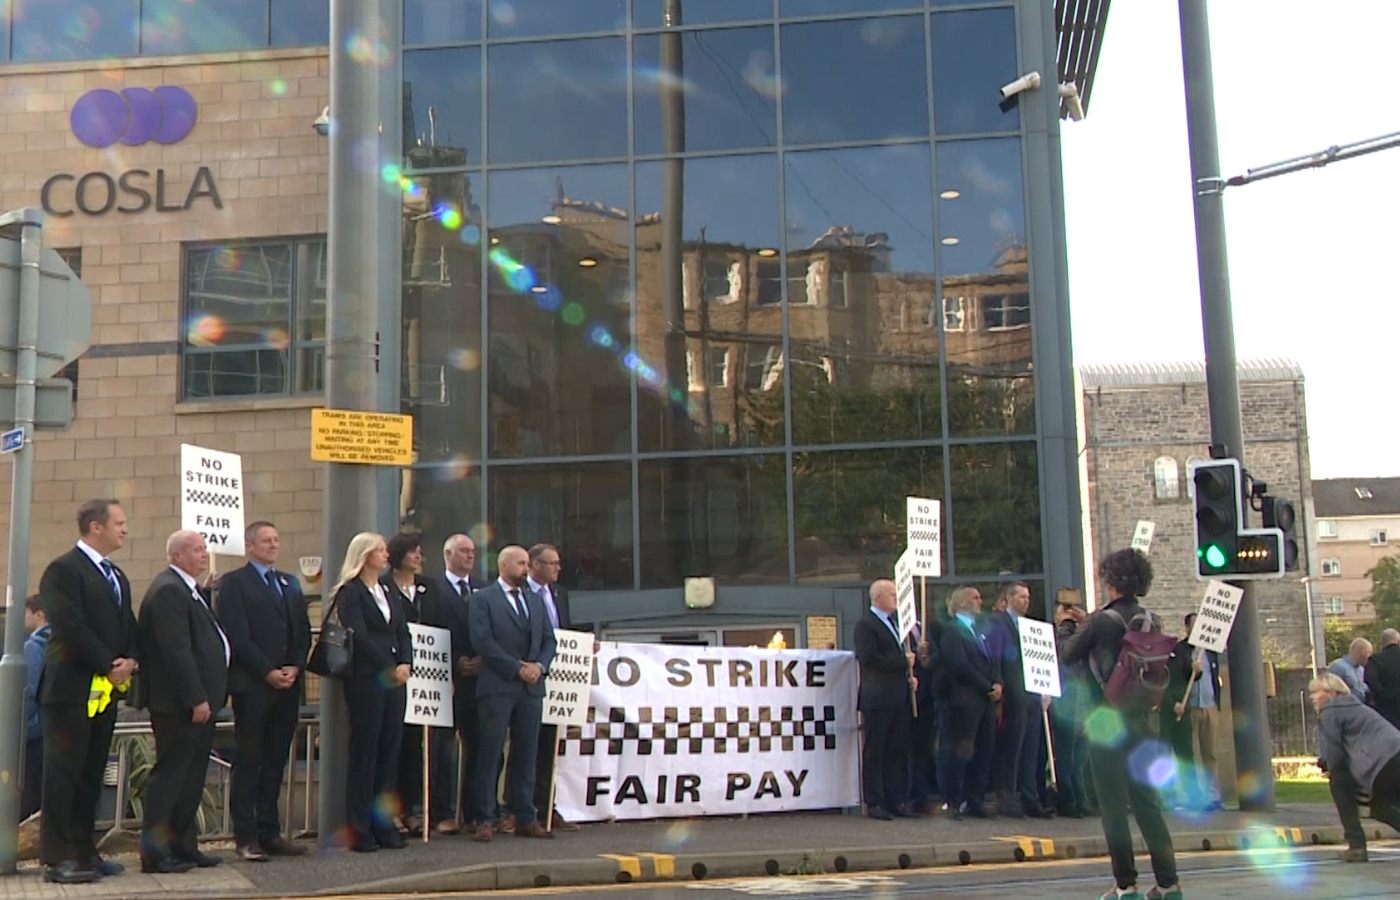 Police officers protested outside the COSLA building in Edinburgh.